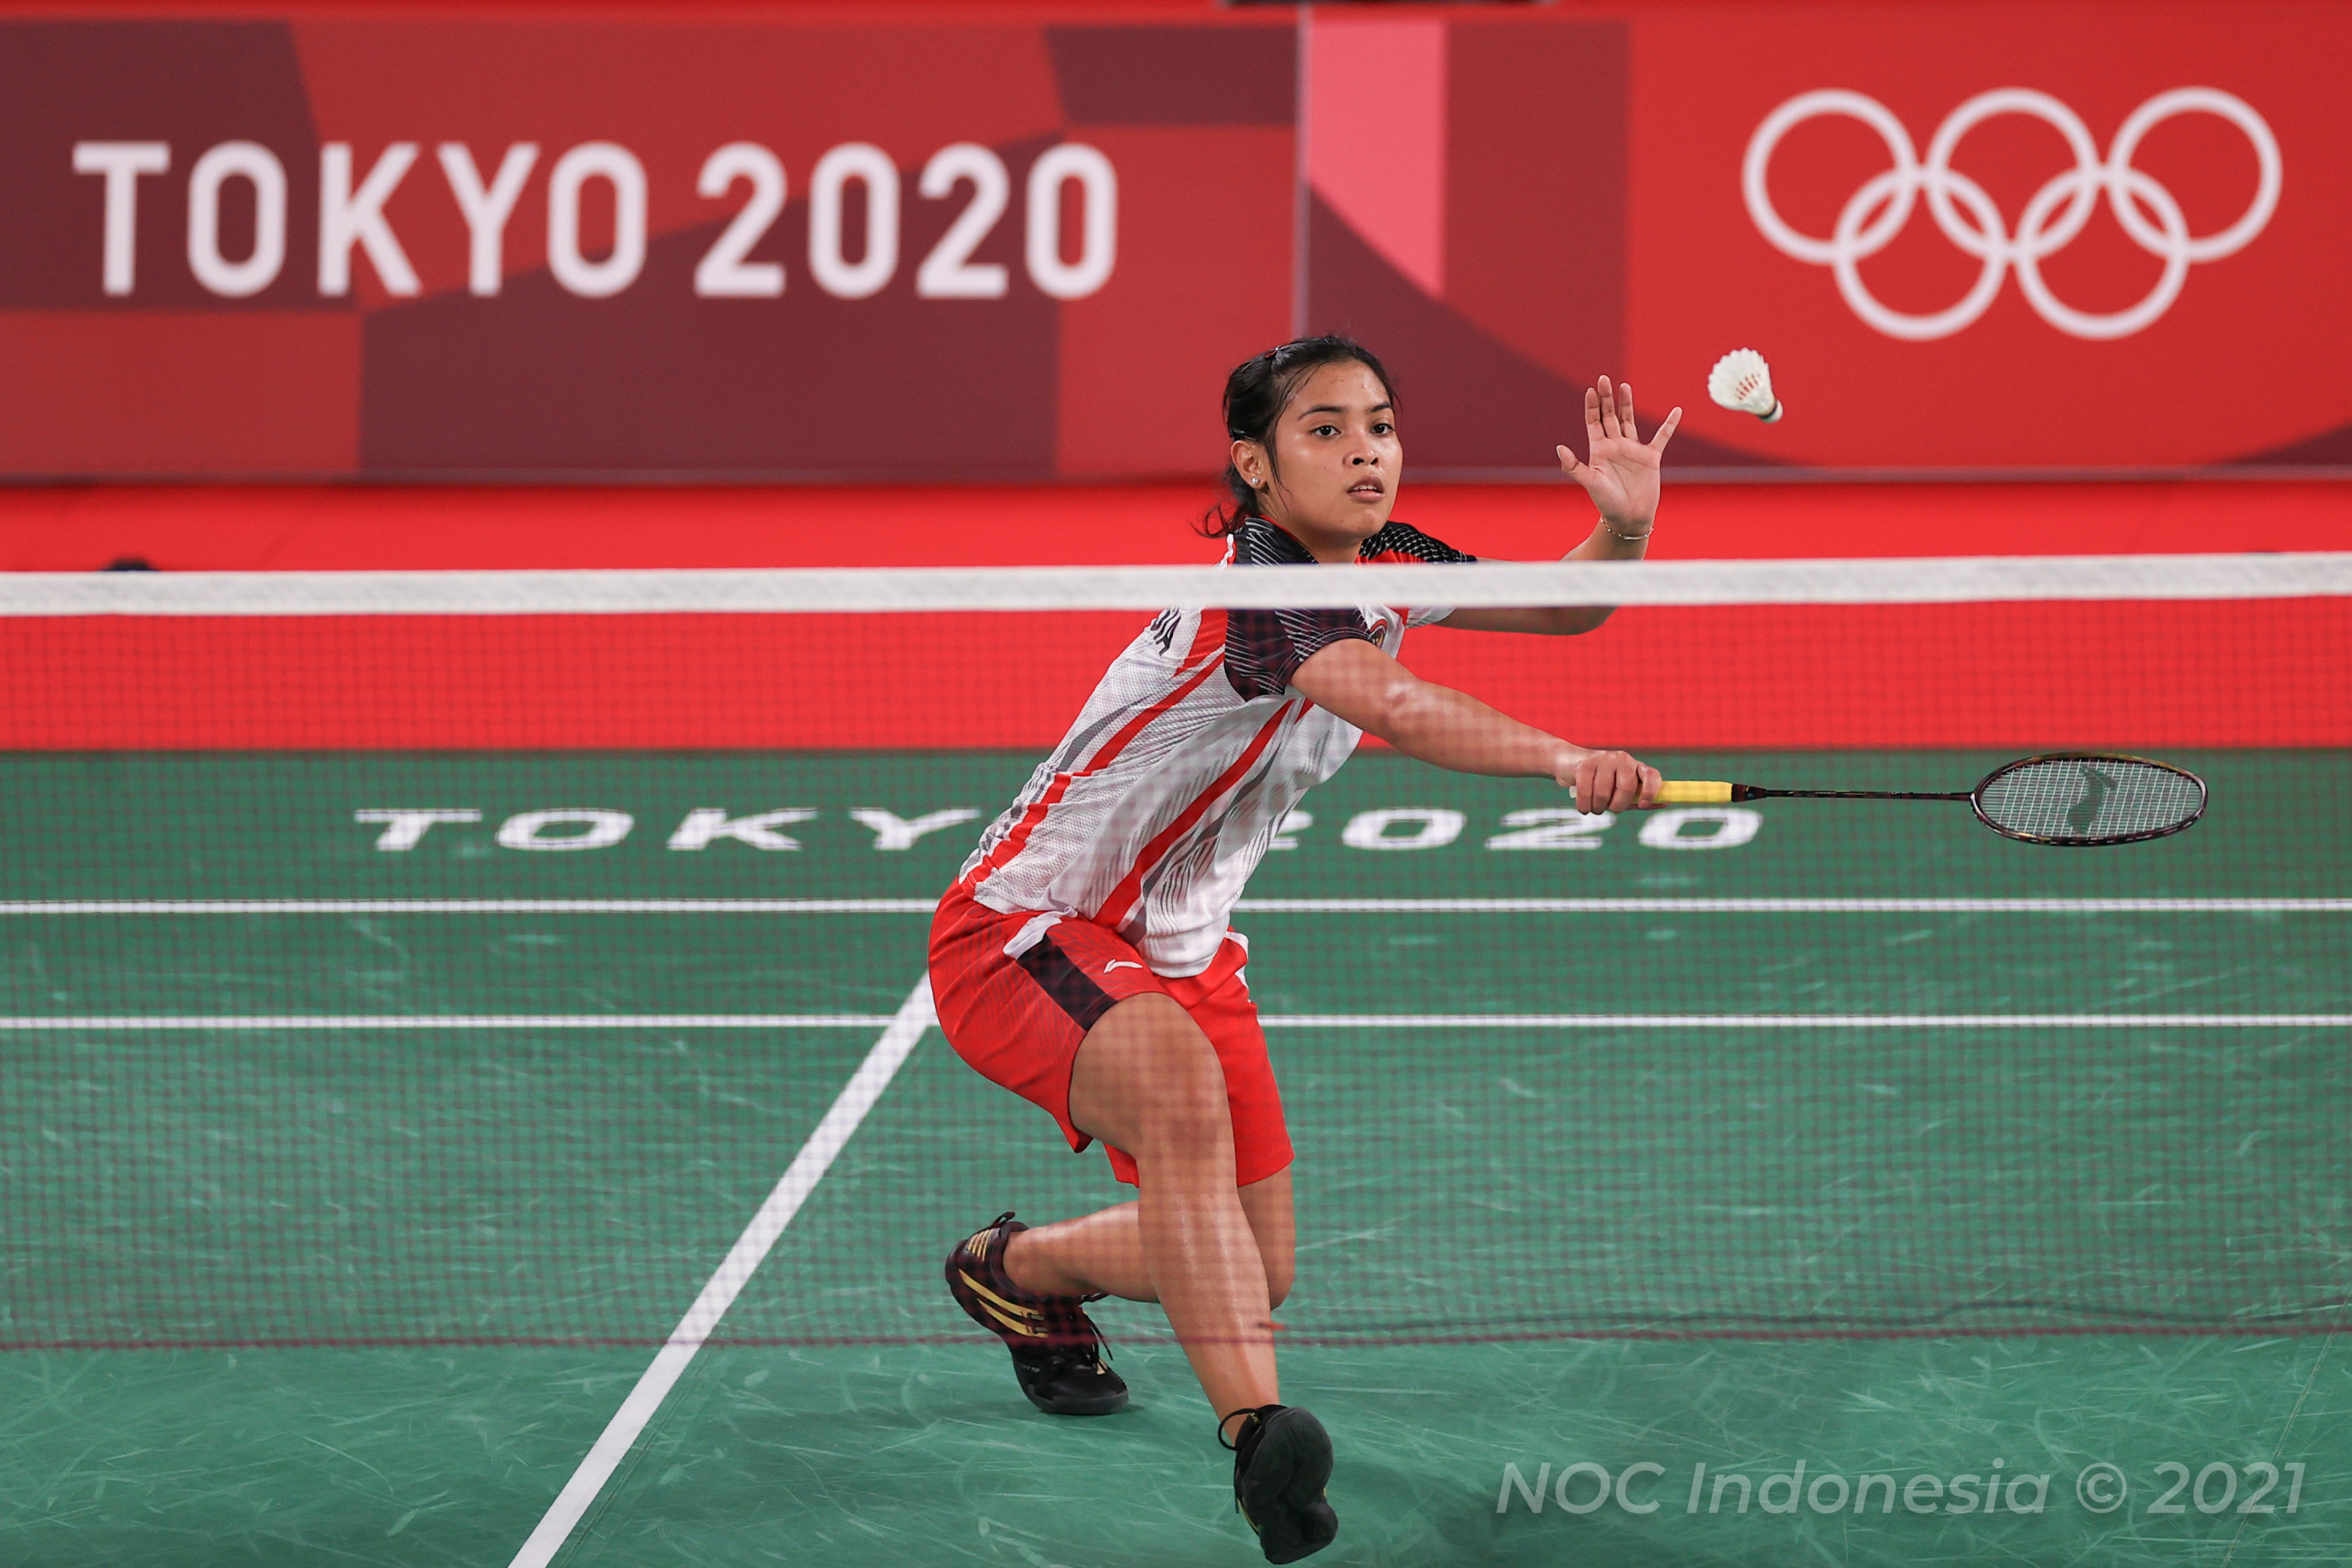 Gregoria to face Ratchanok Intanon in Round of 16 - Indonesia Olympic Commitee